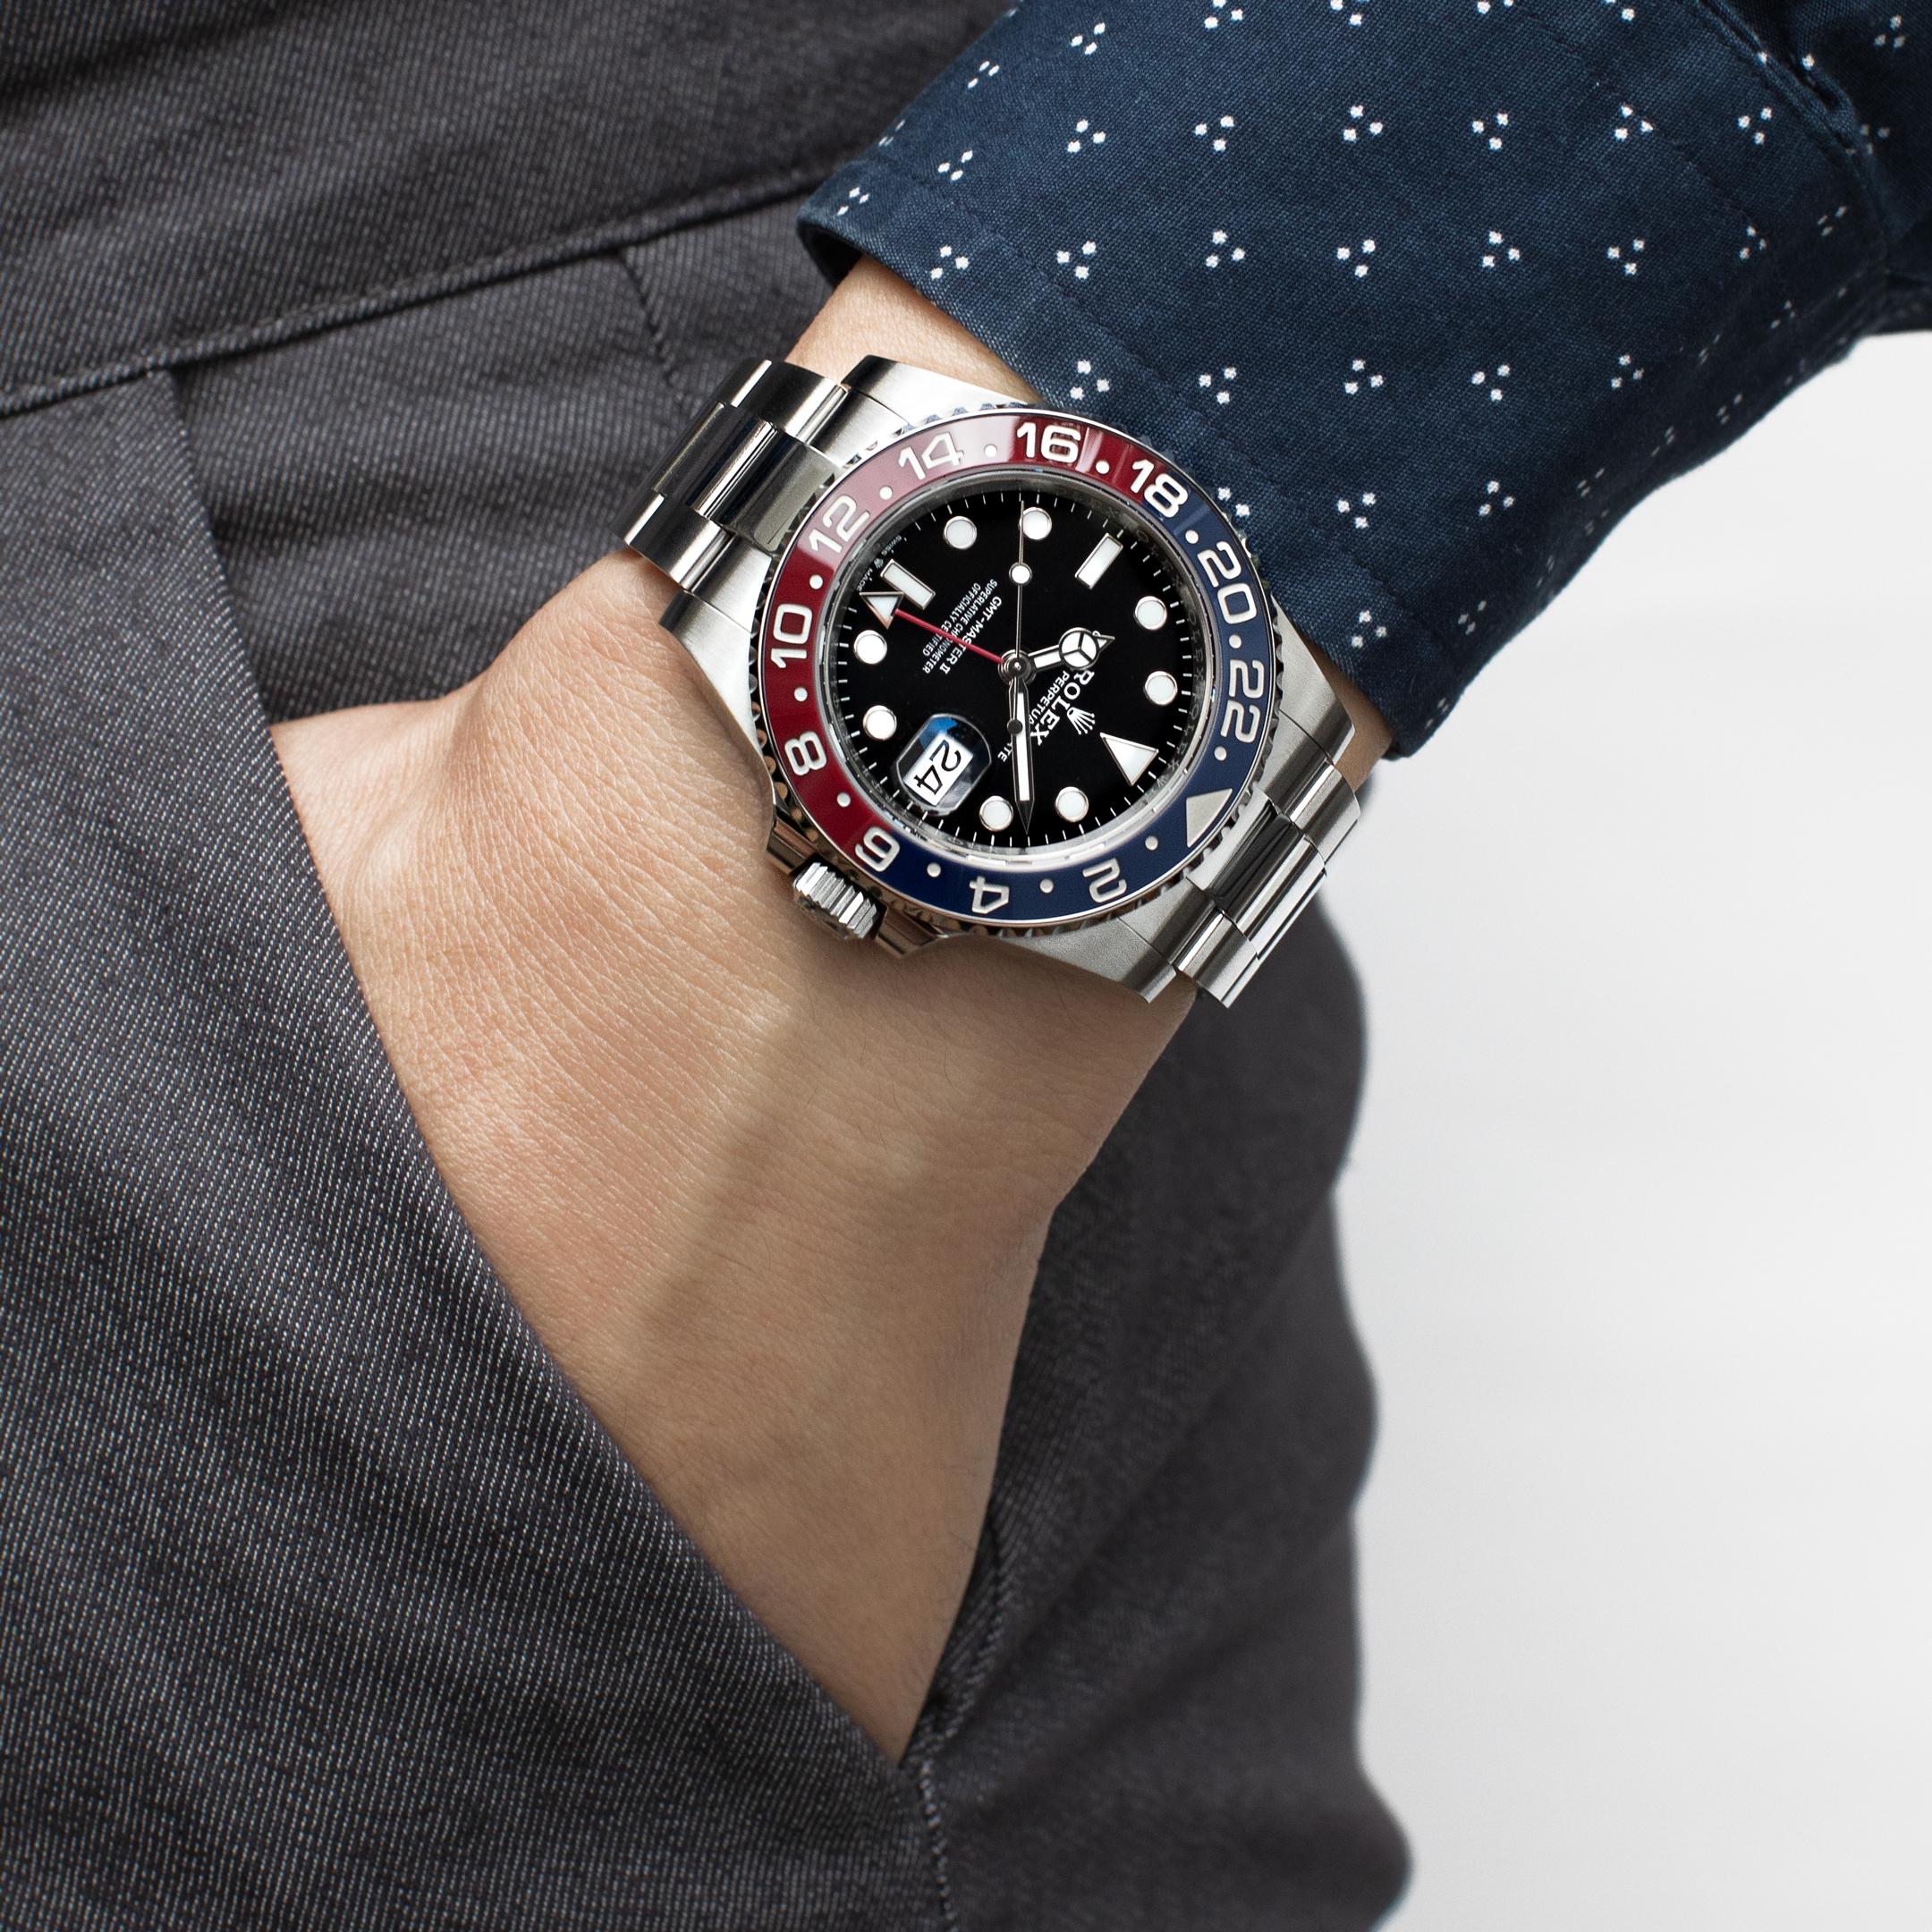 The Rolex GMT Master II is one of Rolex's finest creations. The case measures 40mm and is made of stainless steel, featuring a red and blue 